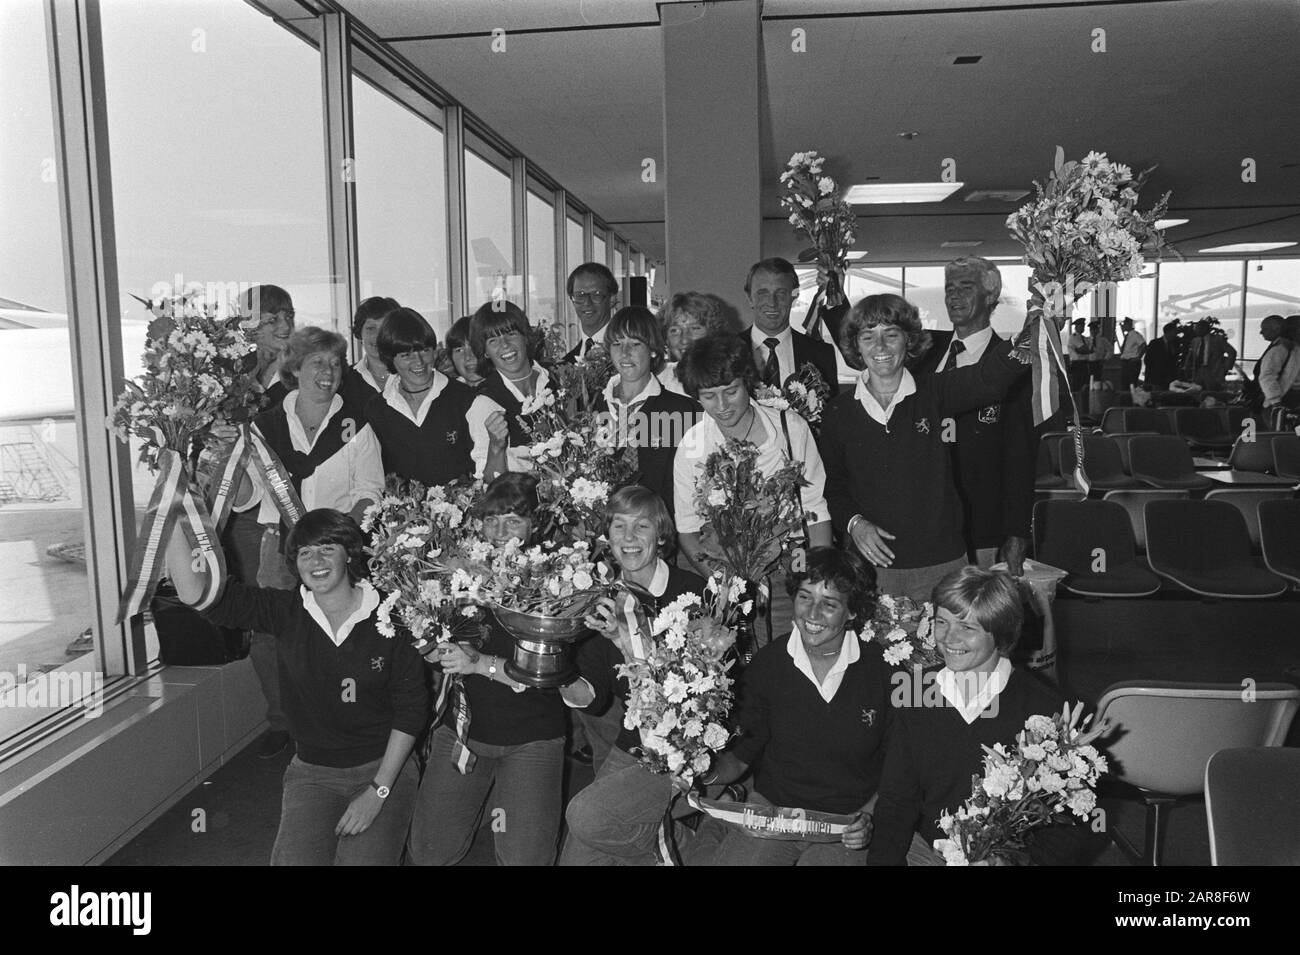 Arrival from Canada of world champion women's hockey Netherlands at Schiphol  sport, hockey, arrival and departure, flowers, group portraits Date: 31 August 1979 Location: Noord-Holland, Schiphol Keywords: arrival and departure, flowers, group portraits, hockey, sports Stock Photo